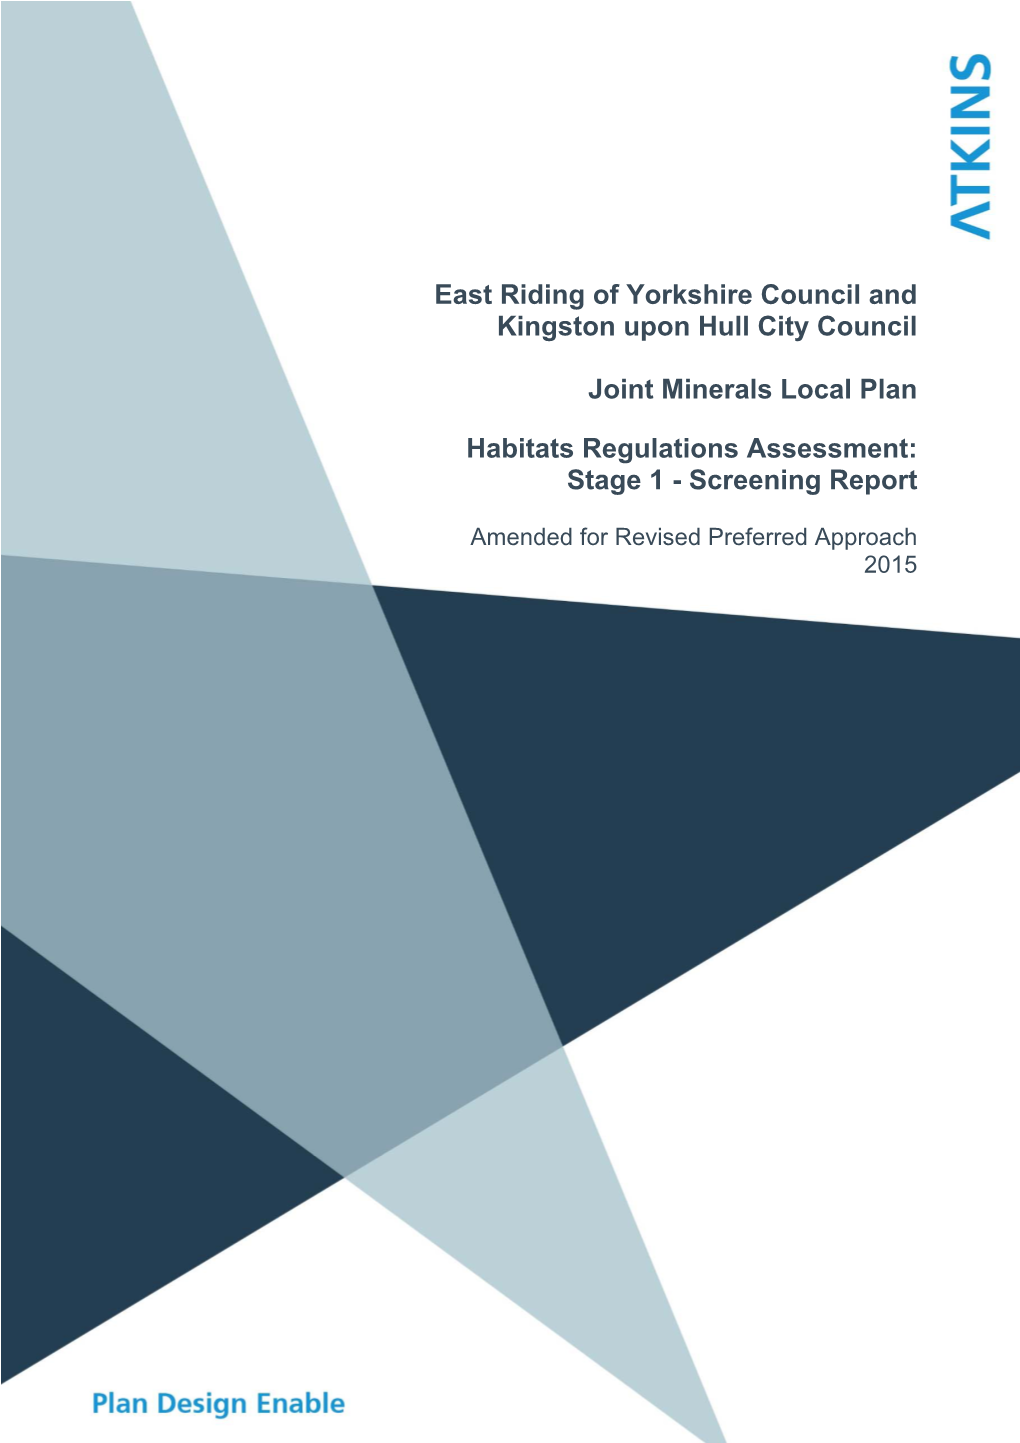 East Riding of Yorkshire Council and Kingston Upon Hull City Council Joint Minerals Local Plan Habitats Regulations Assessment